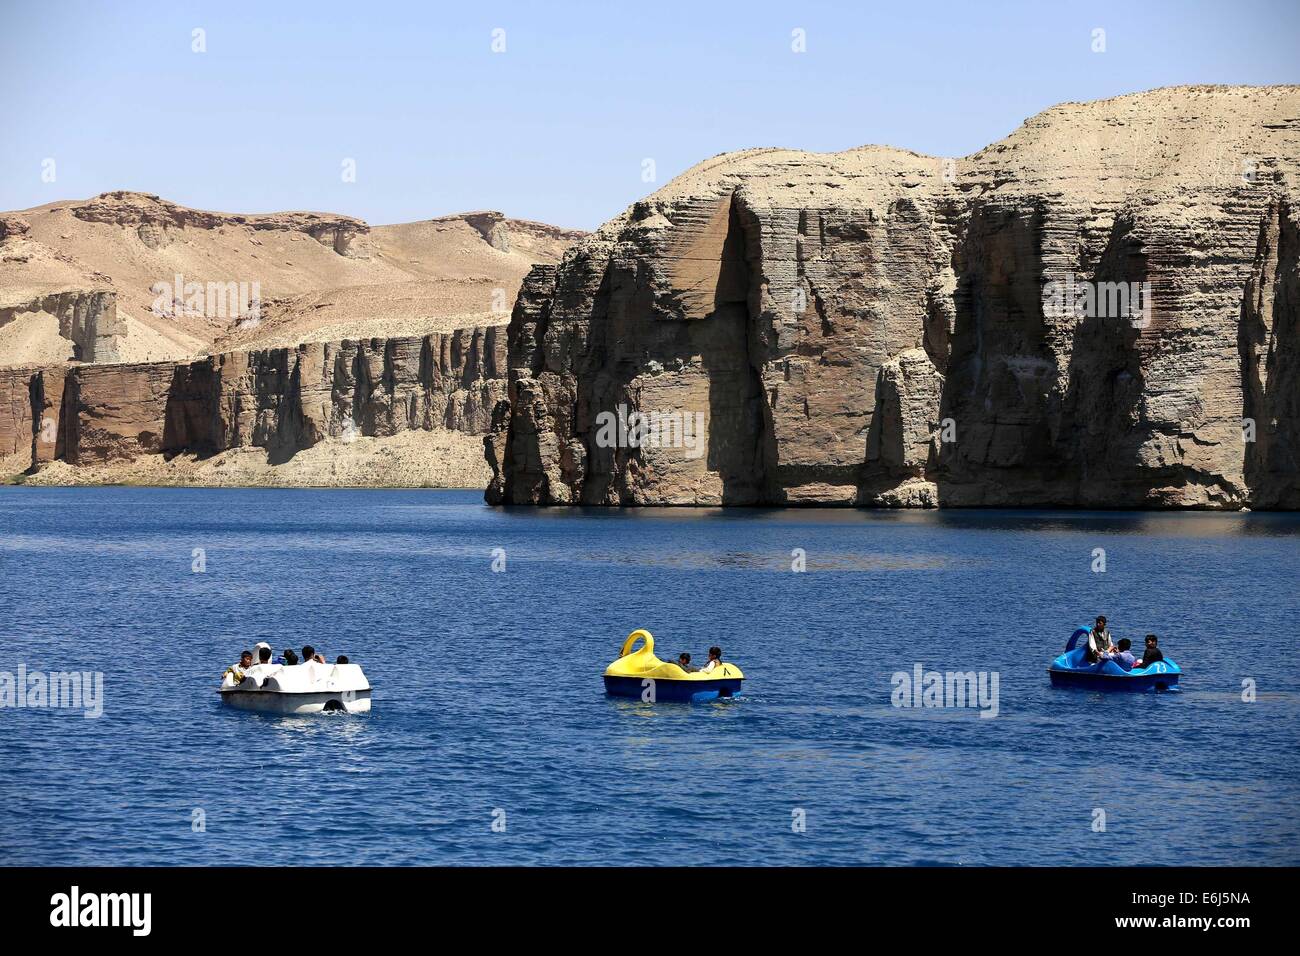 (140825) -- BAMYAN, Aug. 25, 2014 (Xinhua) -- Afghans enjoy boating in Band-e-Amir Lake in Bamyan, central Afghanistan, on Aug. 23, 2014. (Xinhua/Kamran) Stock Photo